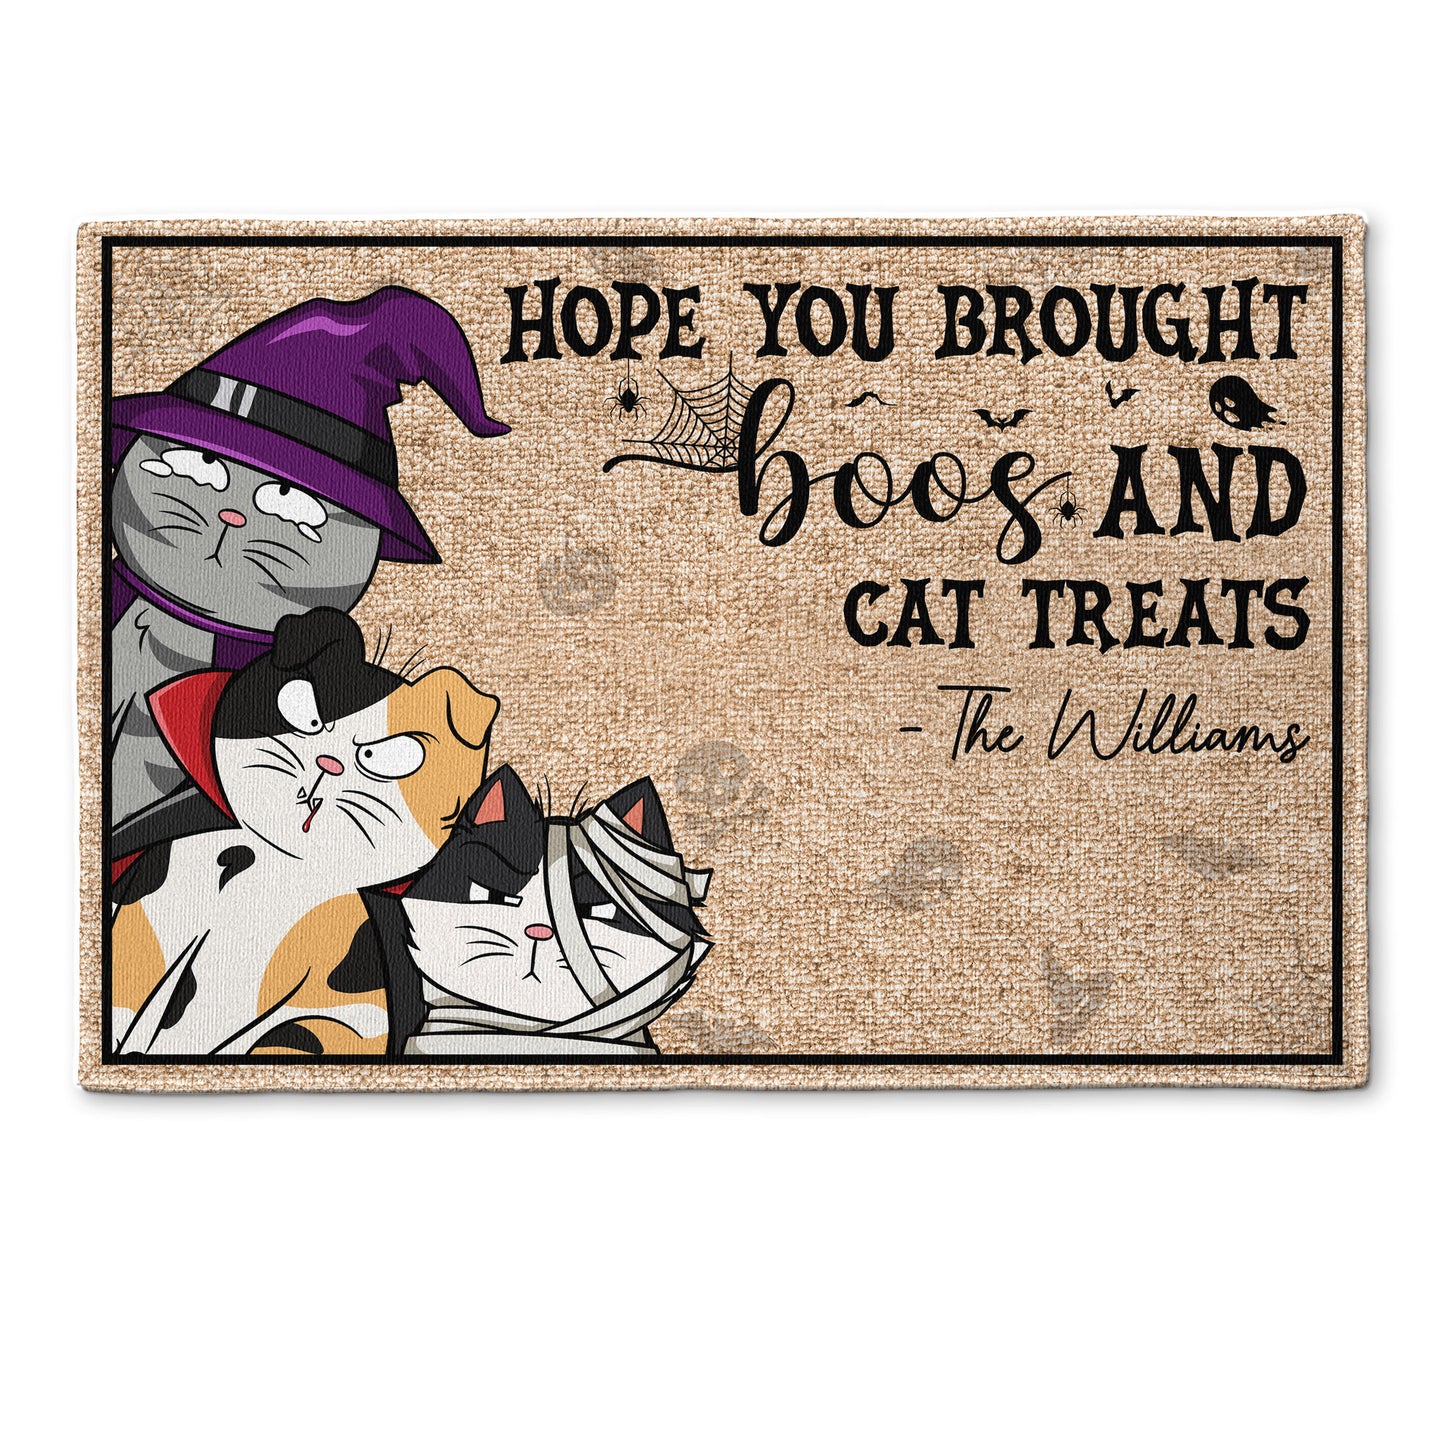 Hope You Brought Boos And Cat Treats - Personalized Doormat